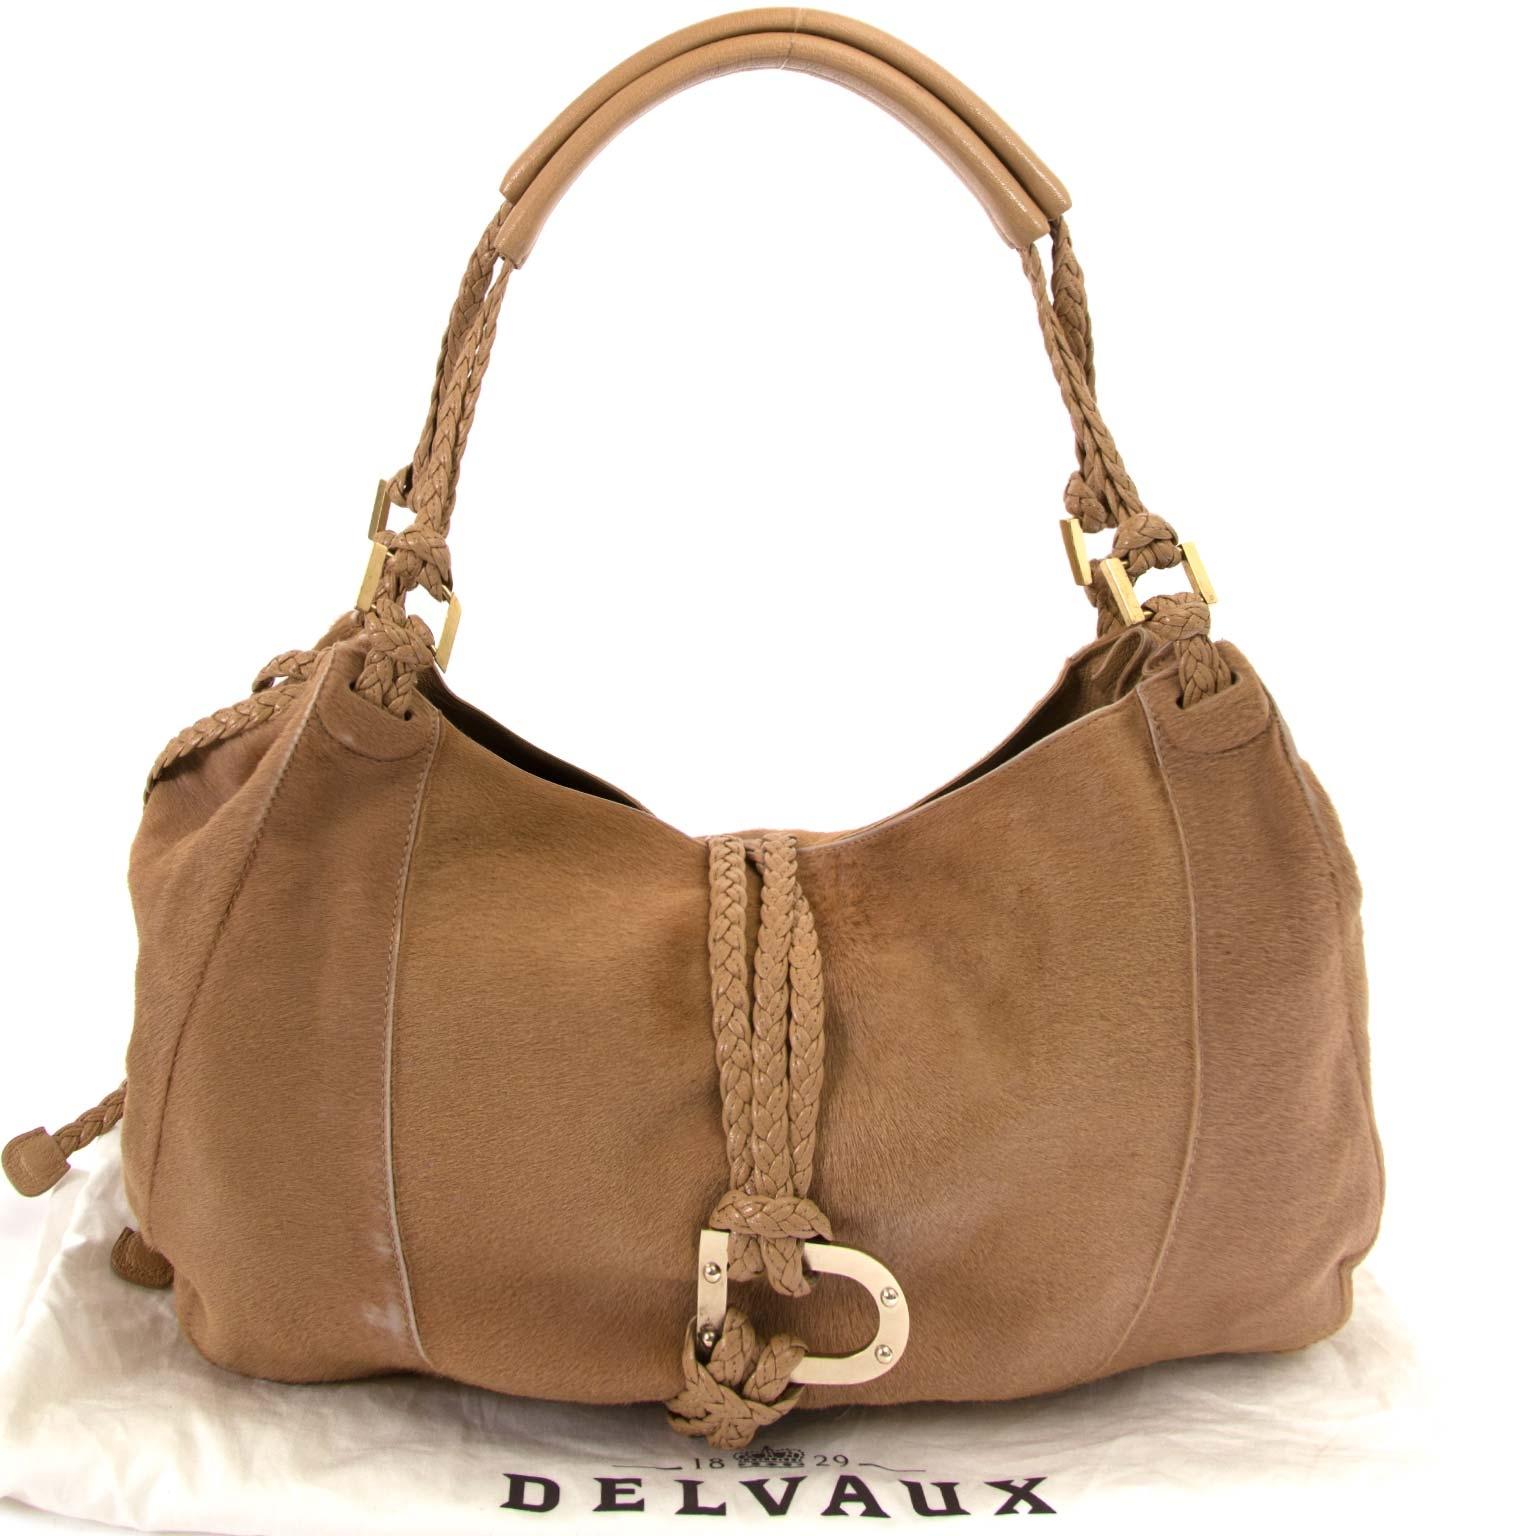 Good condition

Delvaux Beige Ponyhair Colette GM Bag

This beautiful Delvaux bag is crafted in beige ponyhair and features beige leather details.
The bag has two woven and leather handles, perfect to wear around the shoulder. It has gold-toned